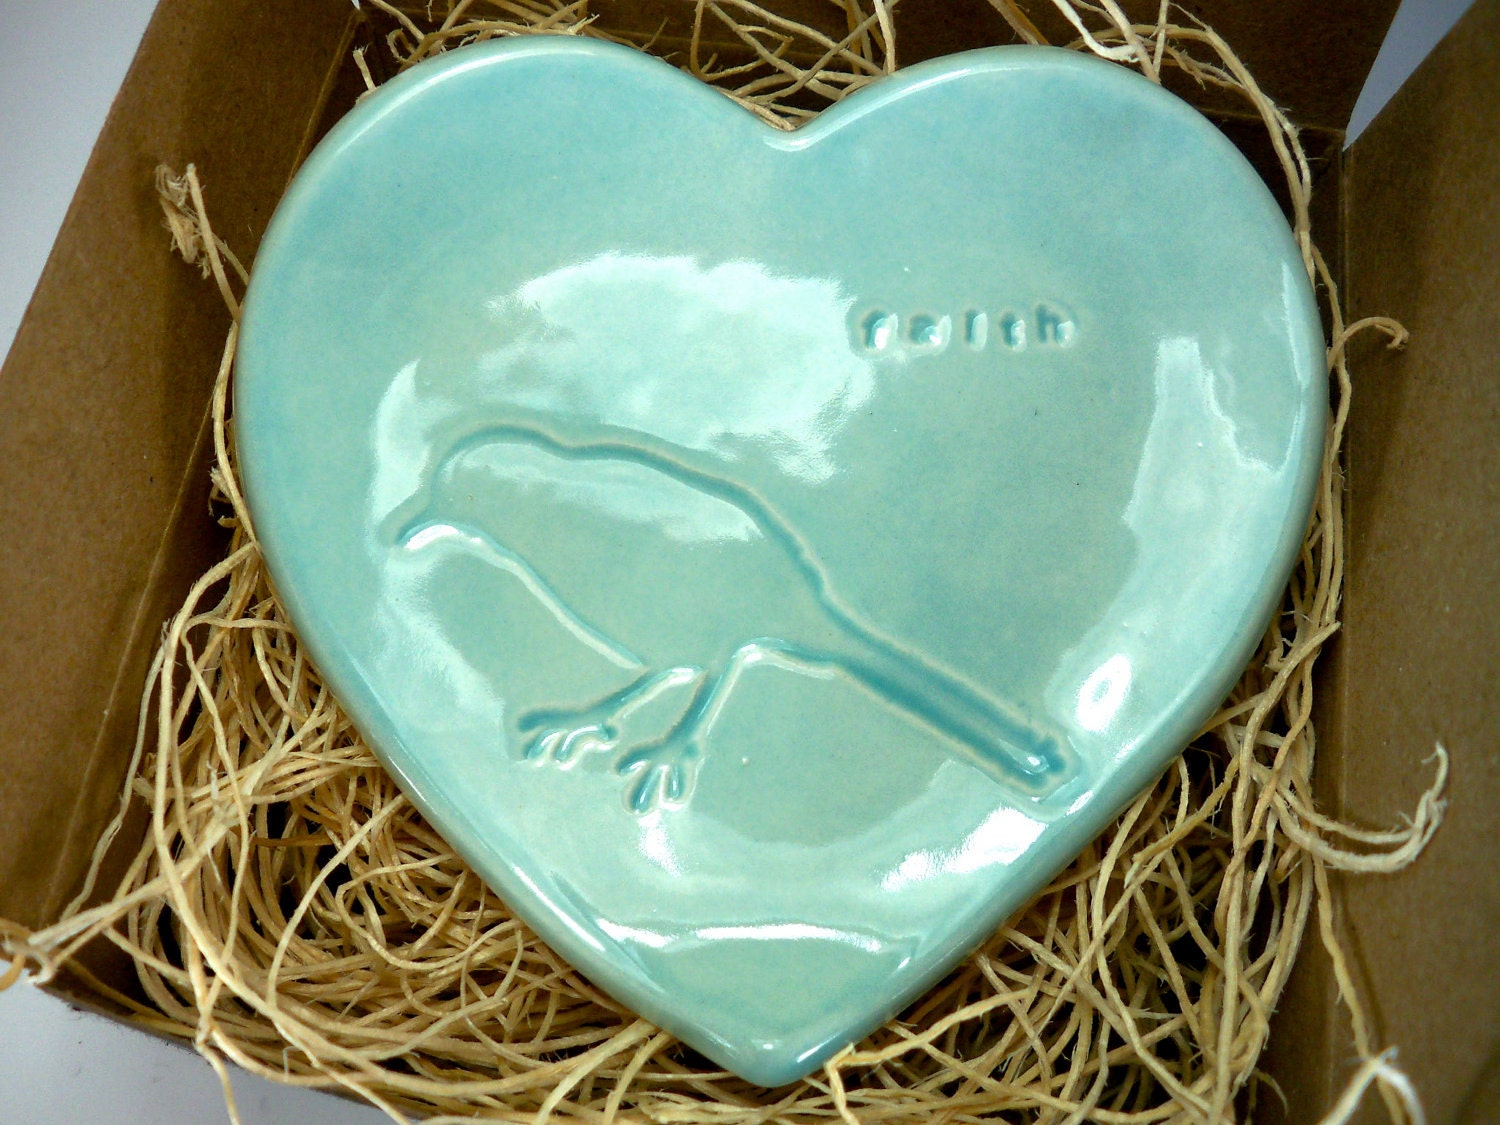 Ring Dish, Stamped with Text and Bird, Aqua Glaze, Gift Boxed ready to ship, Home Decor, Teacher Hostess Gifts